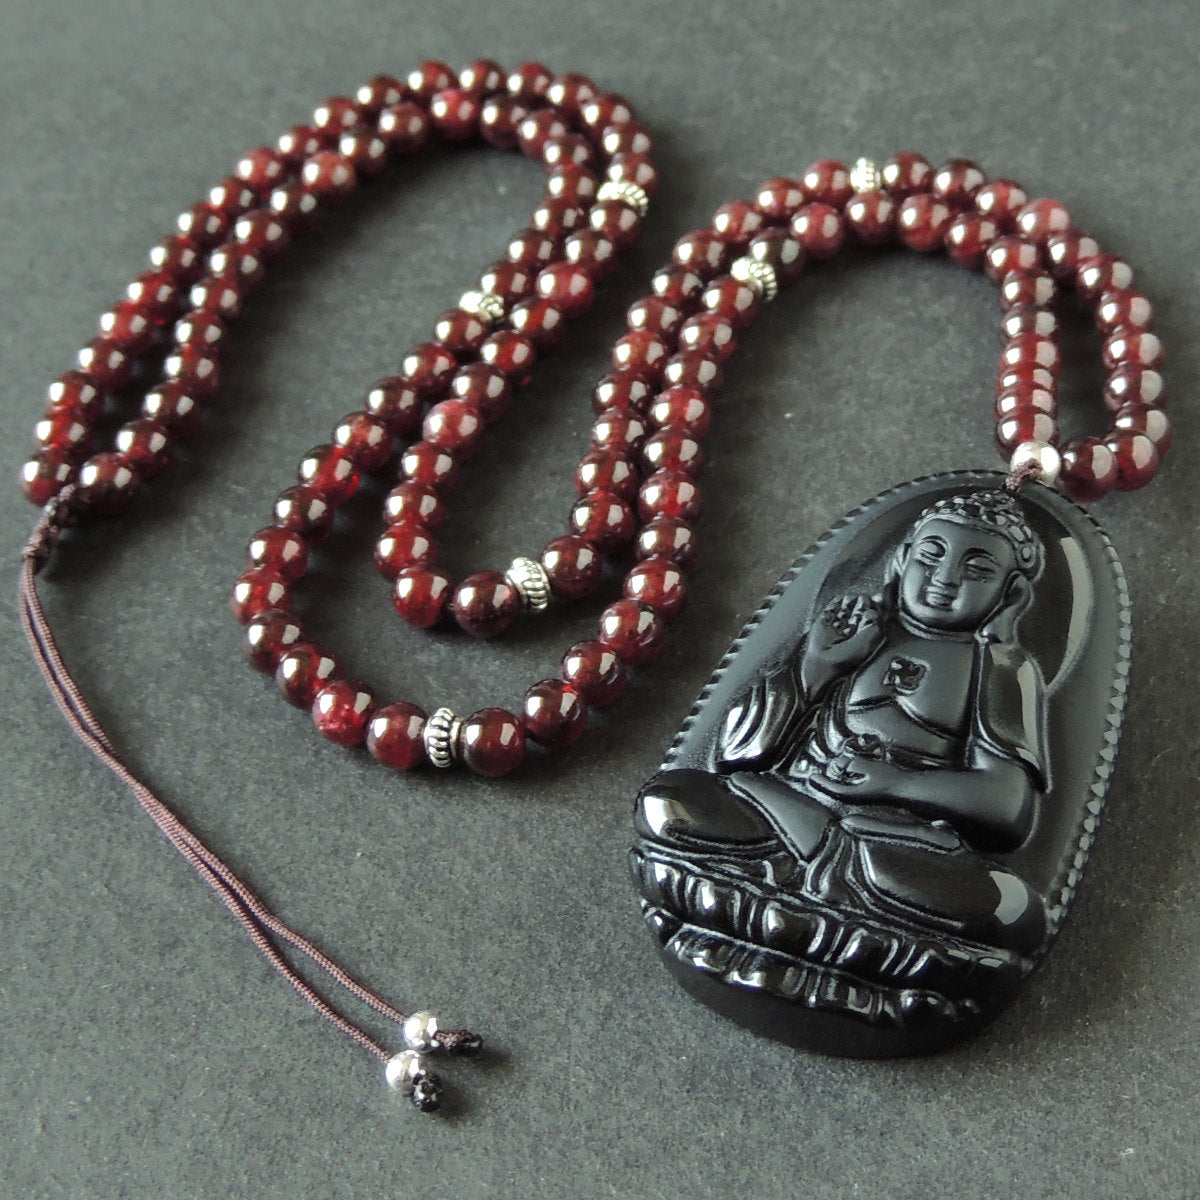 5.5mm Garnet & Black Obsidian Guanyin Buddha Pendant Adjustable Braided Necklace with S925 Sterling Silver Spacer Beads - Handmade by Gem & Silver NK168